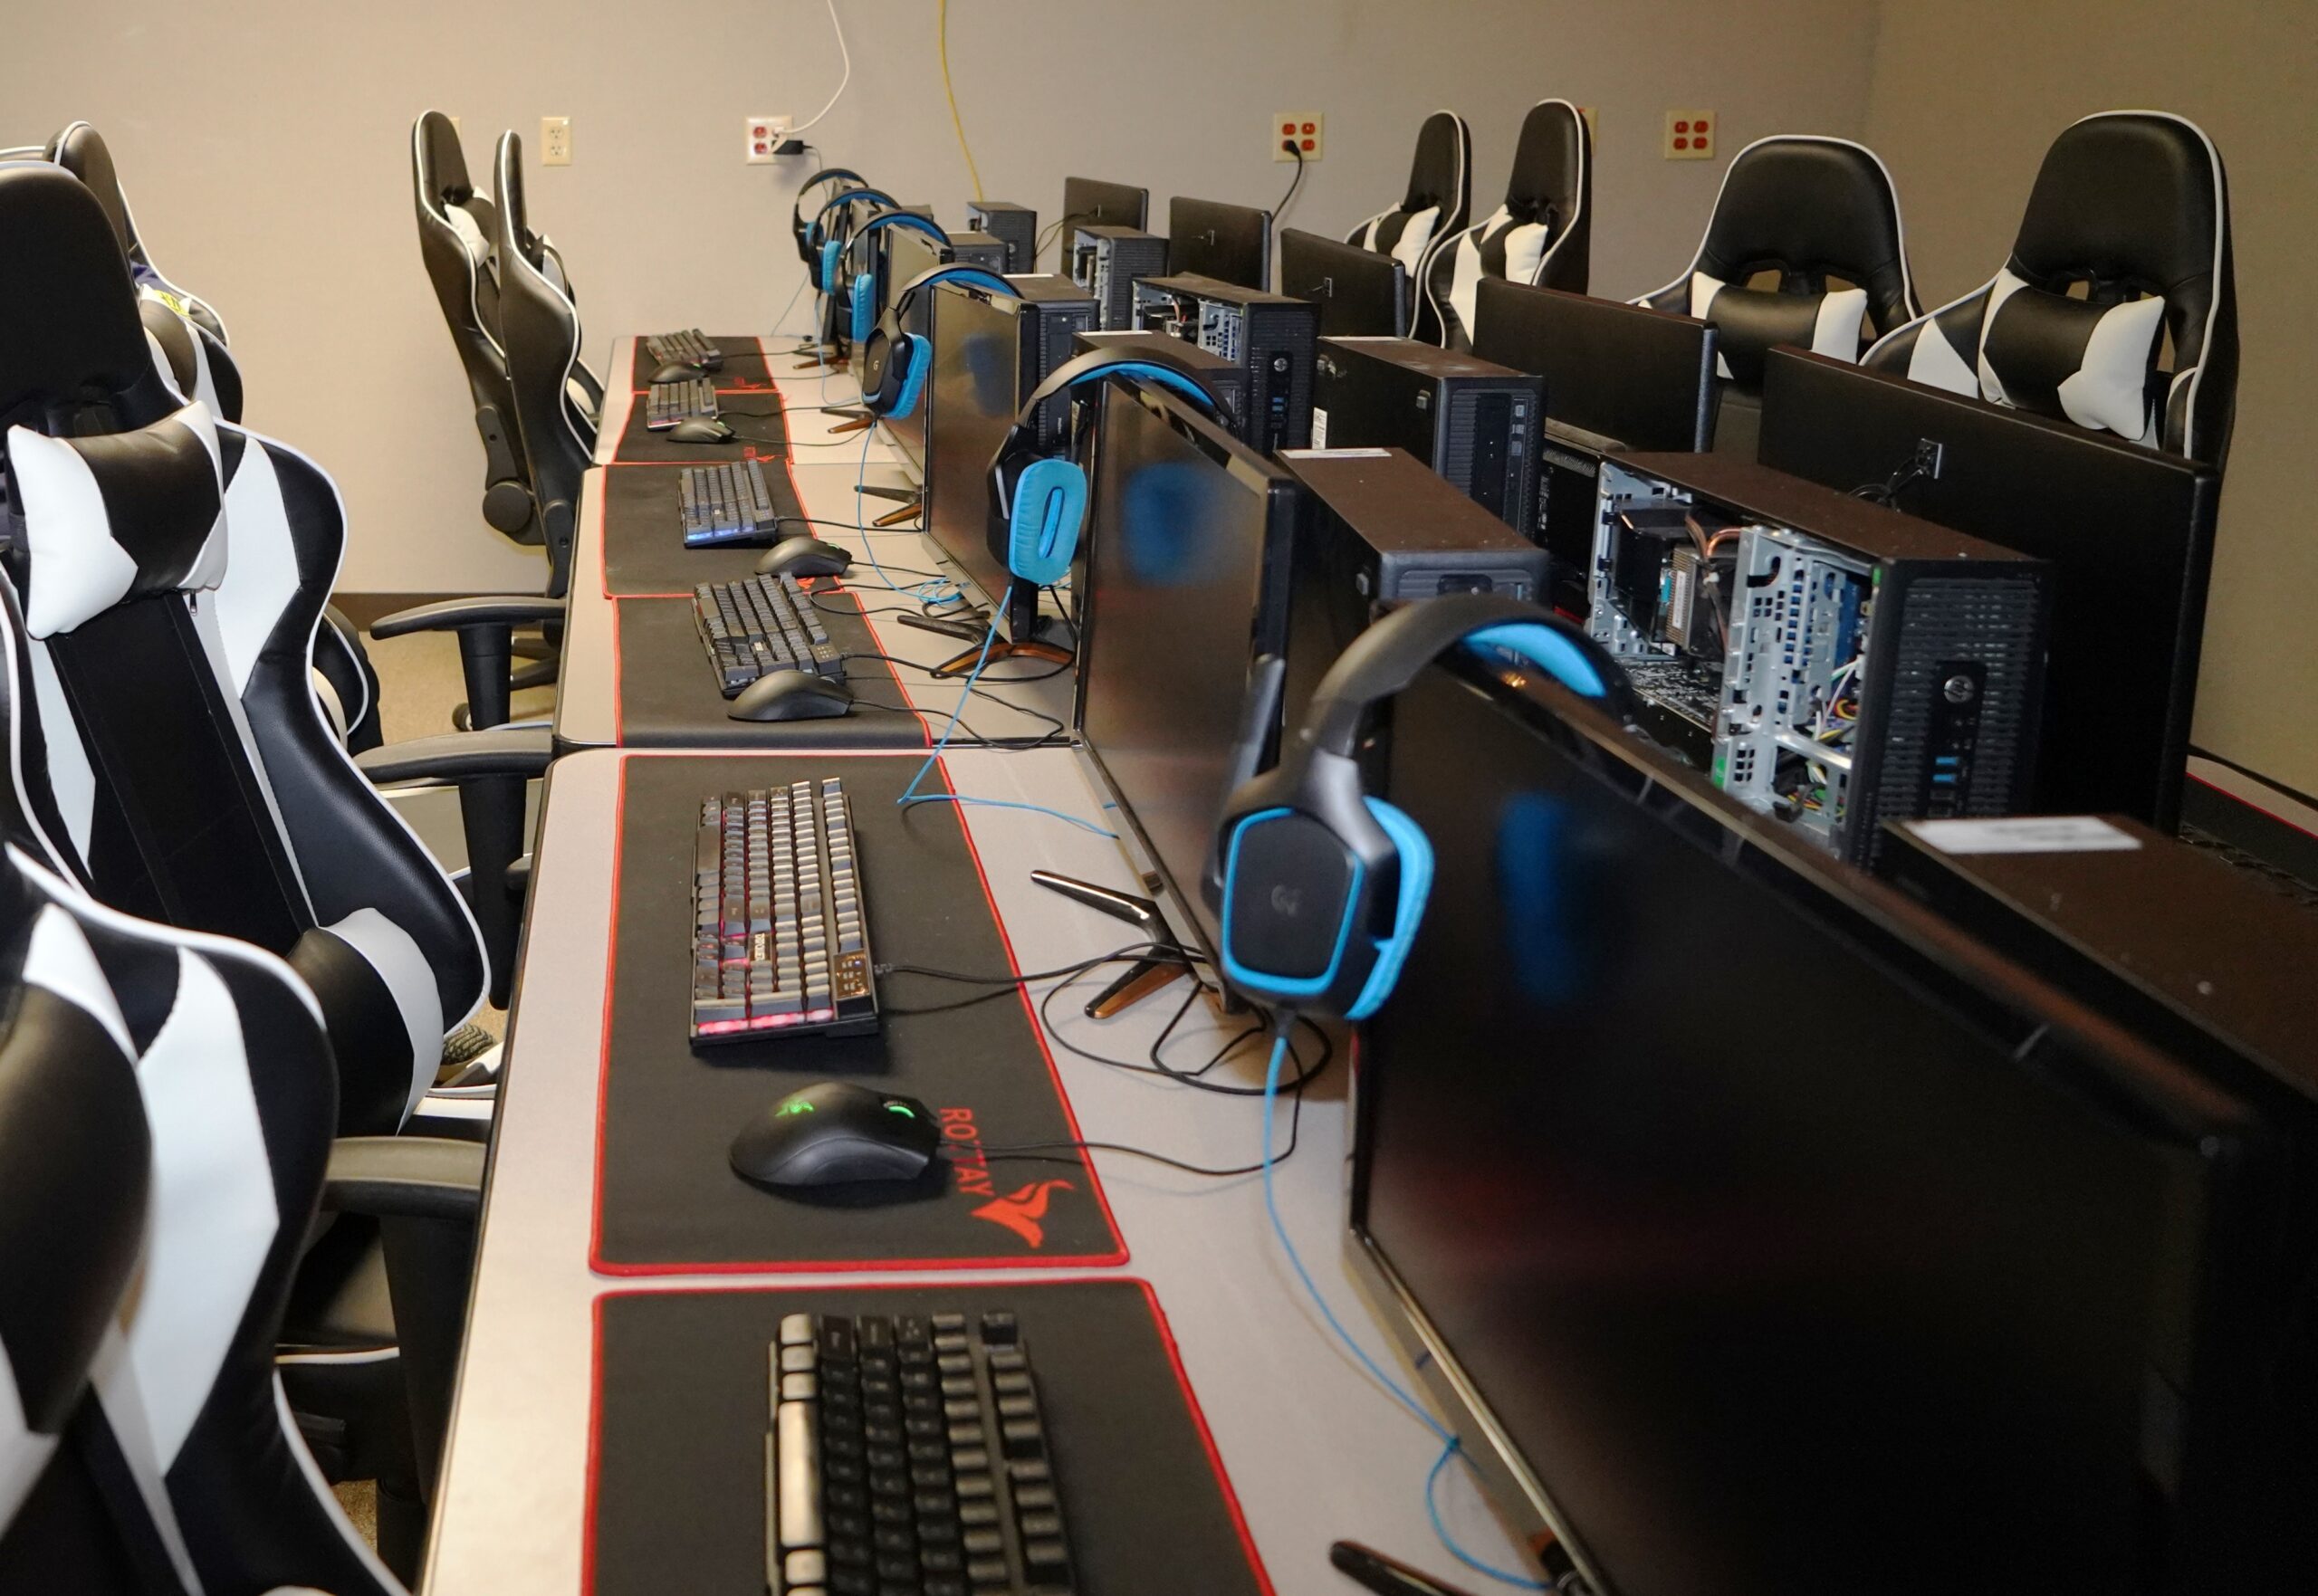 School Participation In Esports Grows As Supporters Fight For Relevance